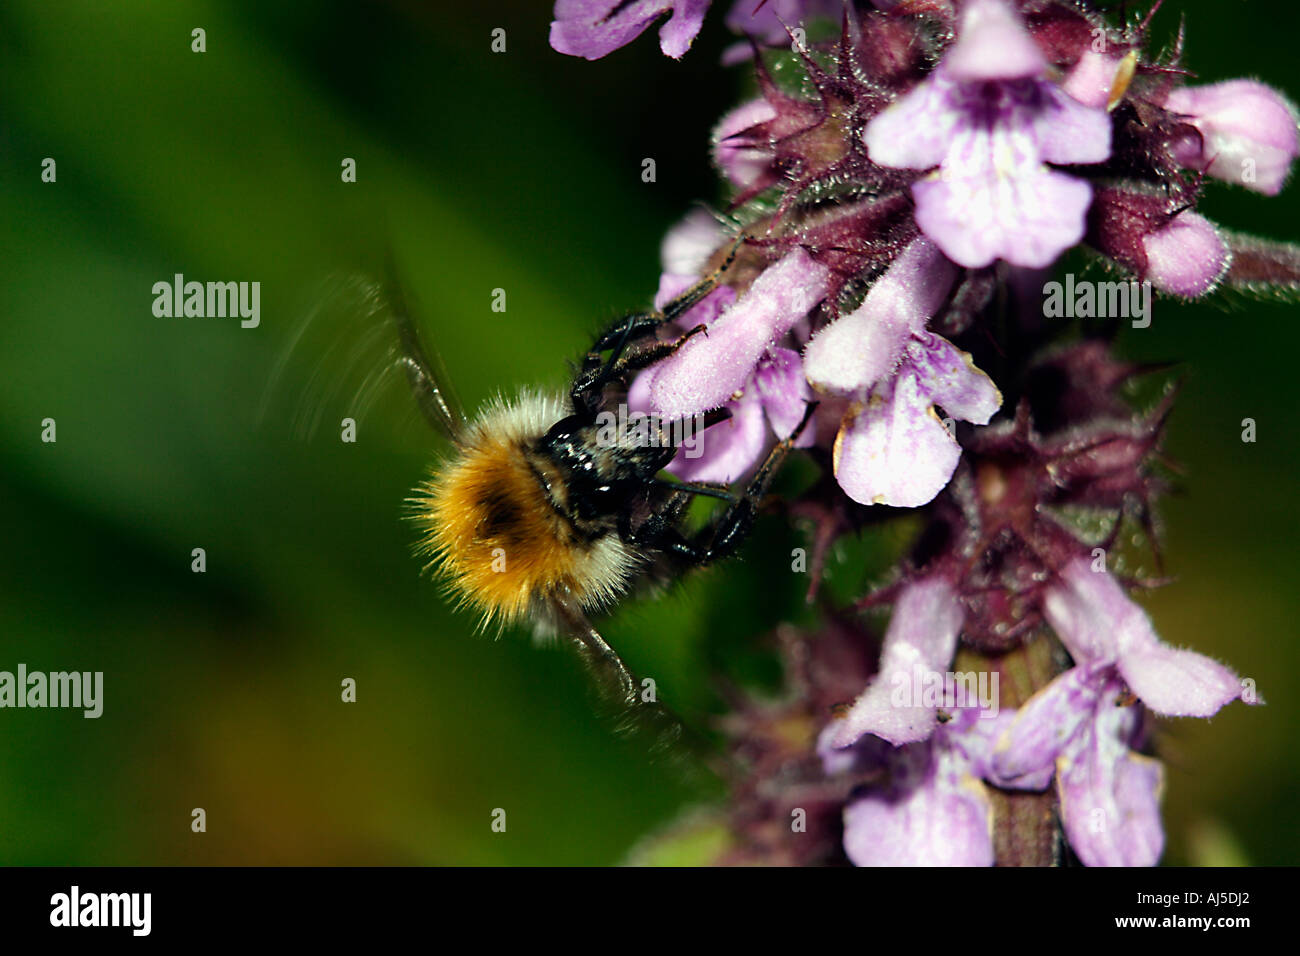 Bumblebee sipping nectar. Stock Photo